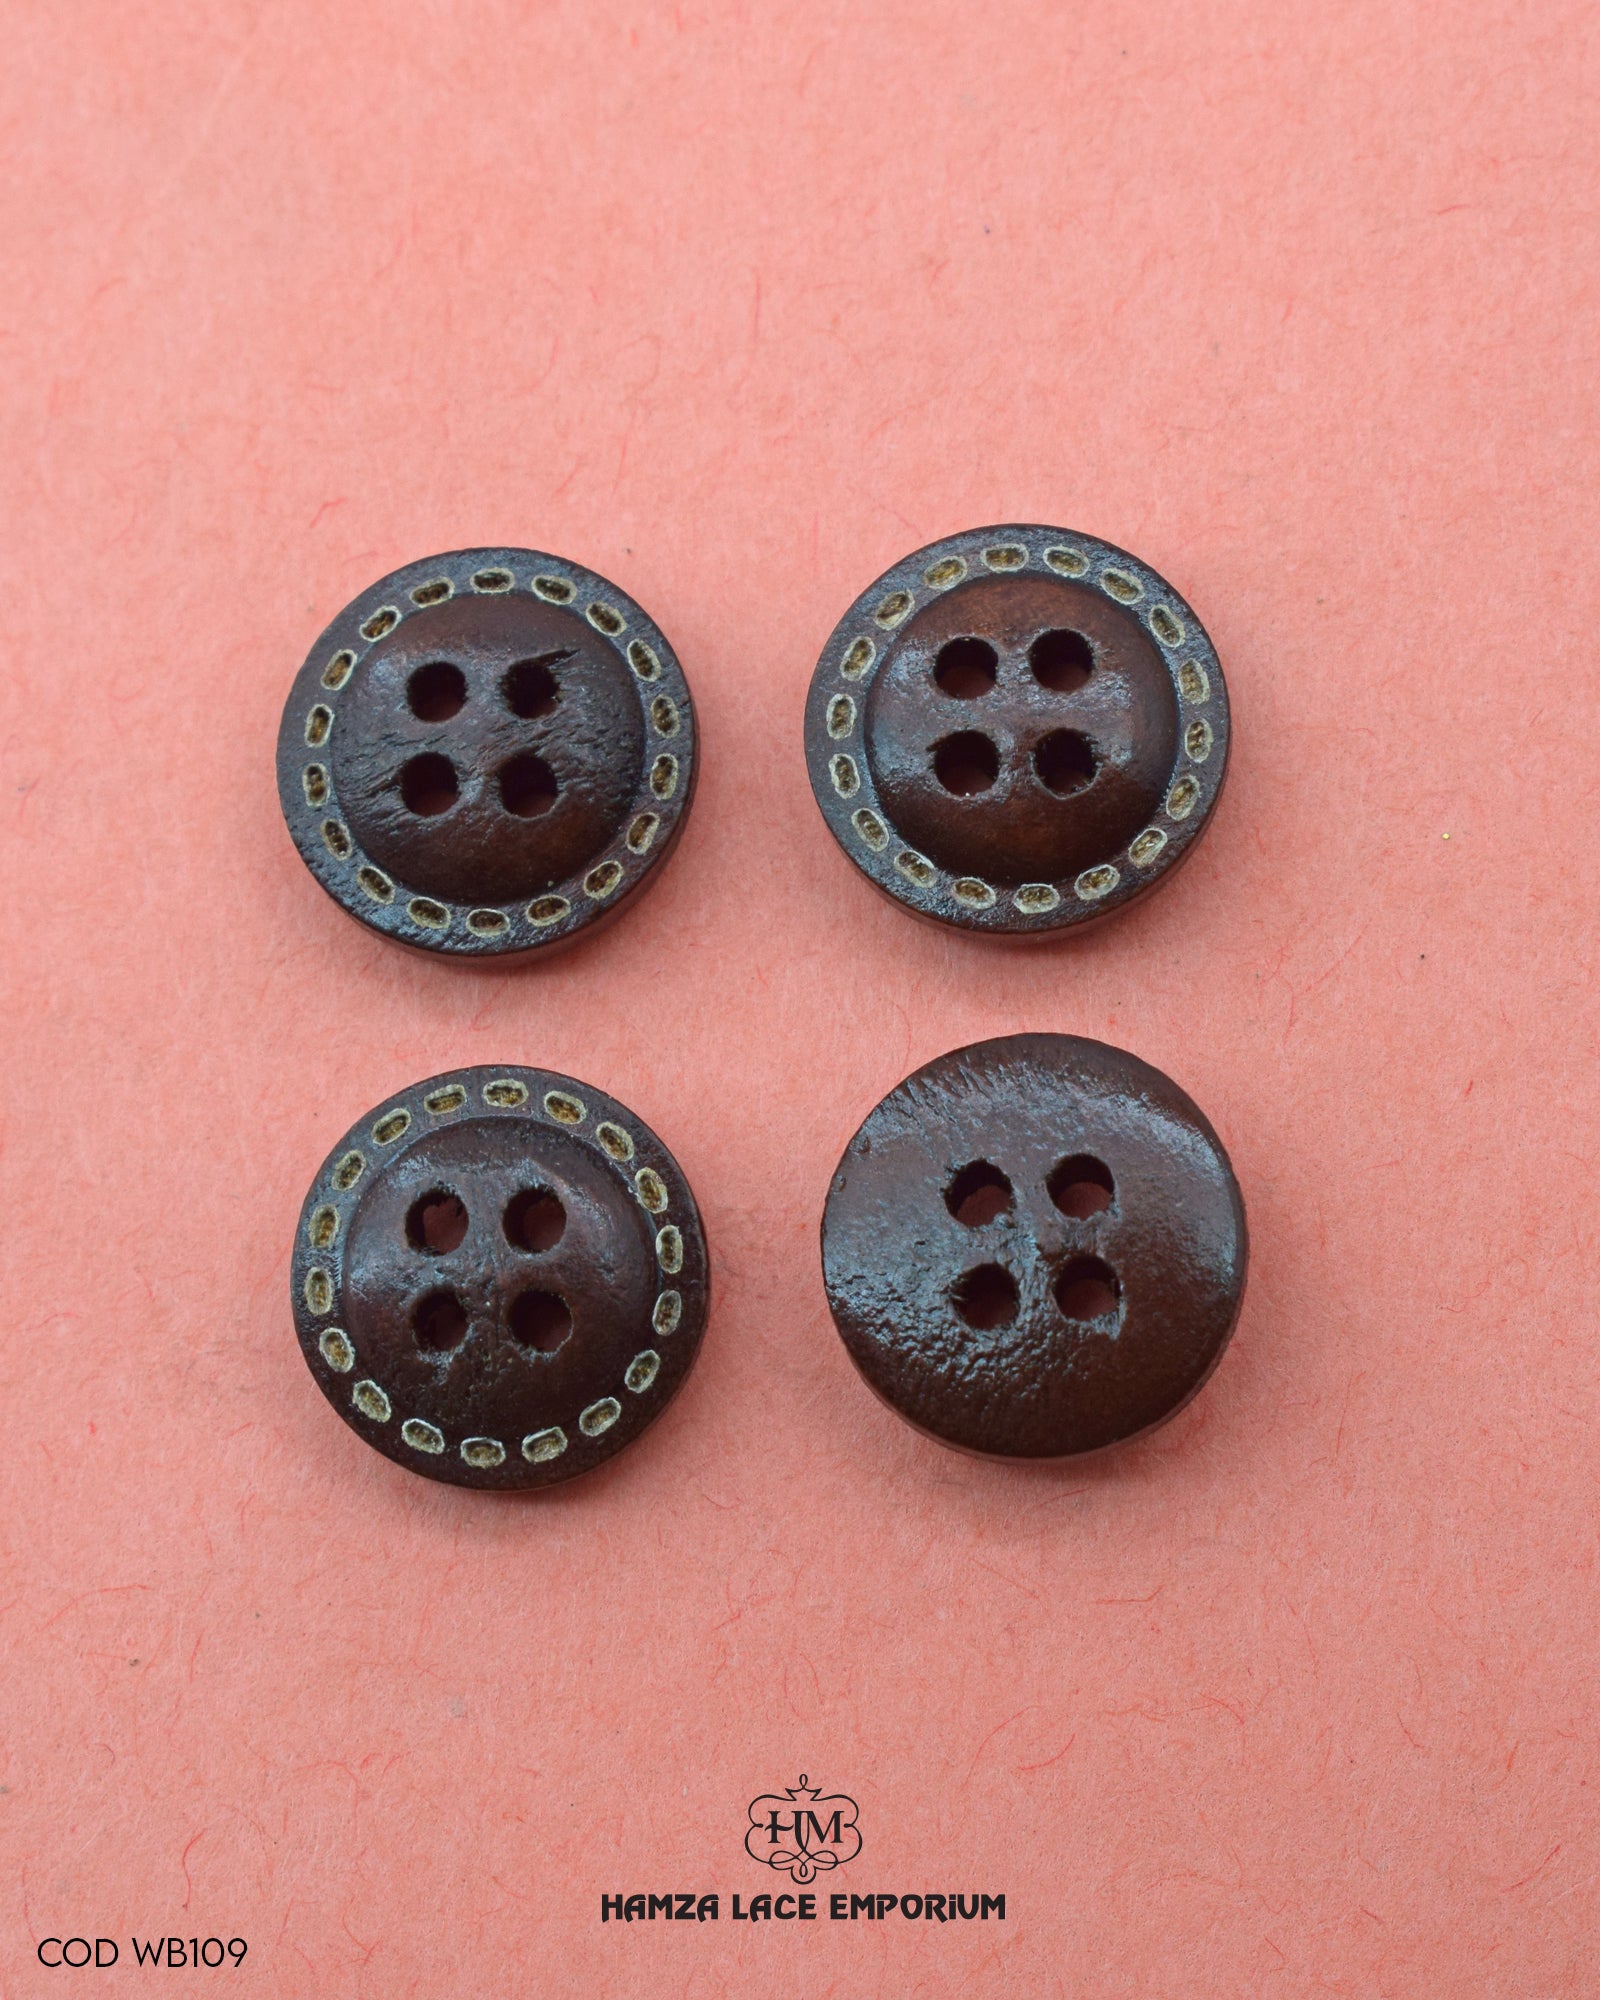 'Four Hole Wooden Button WB109' - suitable for fashion and decorative purposes